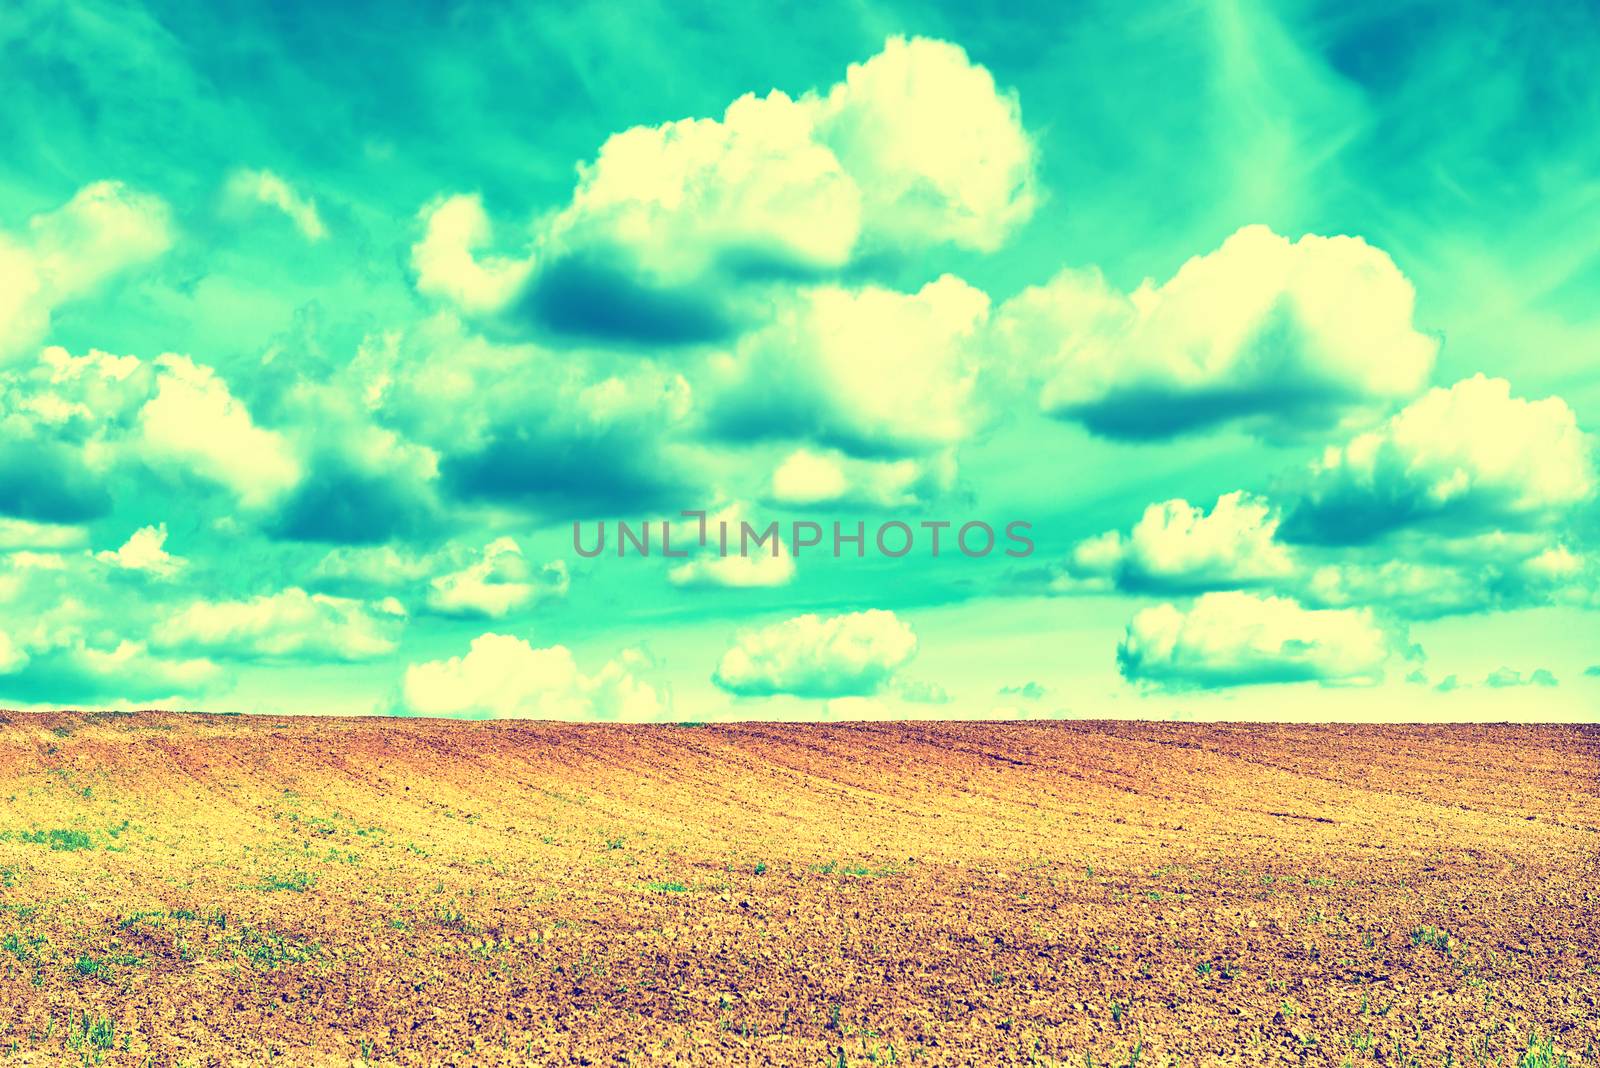 Agriculture field and blue sky with clouds. Instagram filter